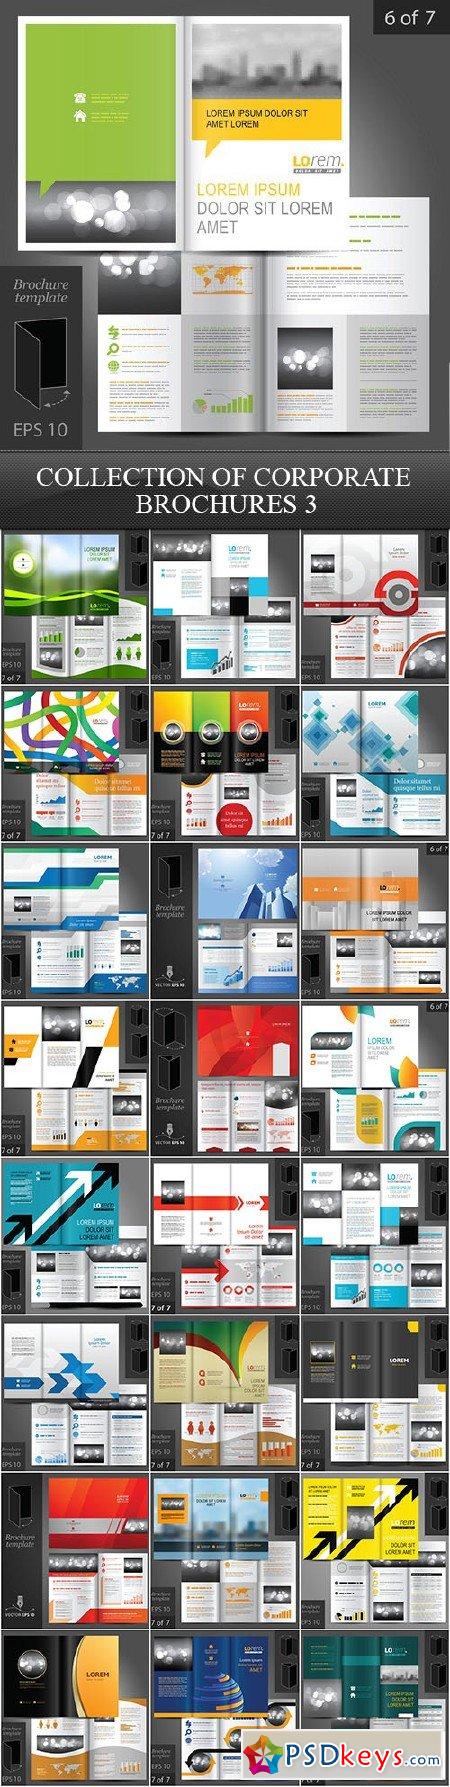 Collection of Corporate Brochures 3 25xEPS